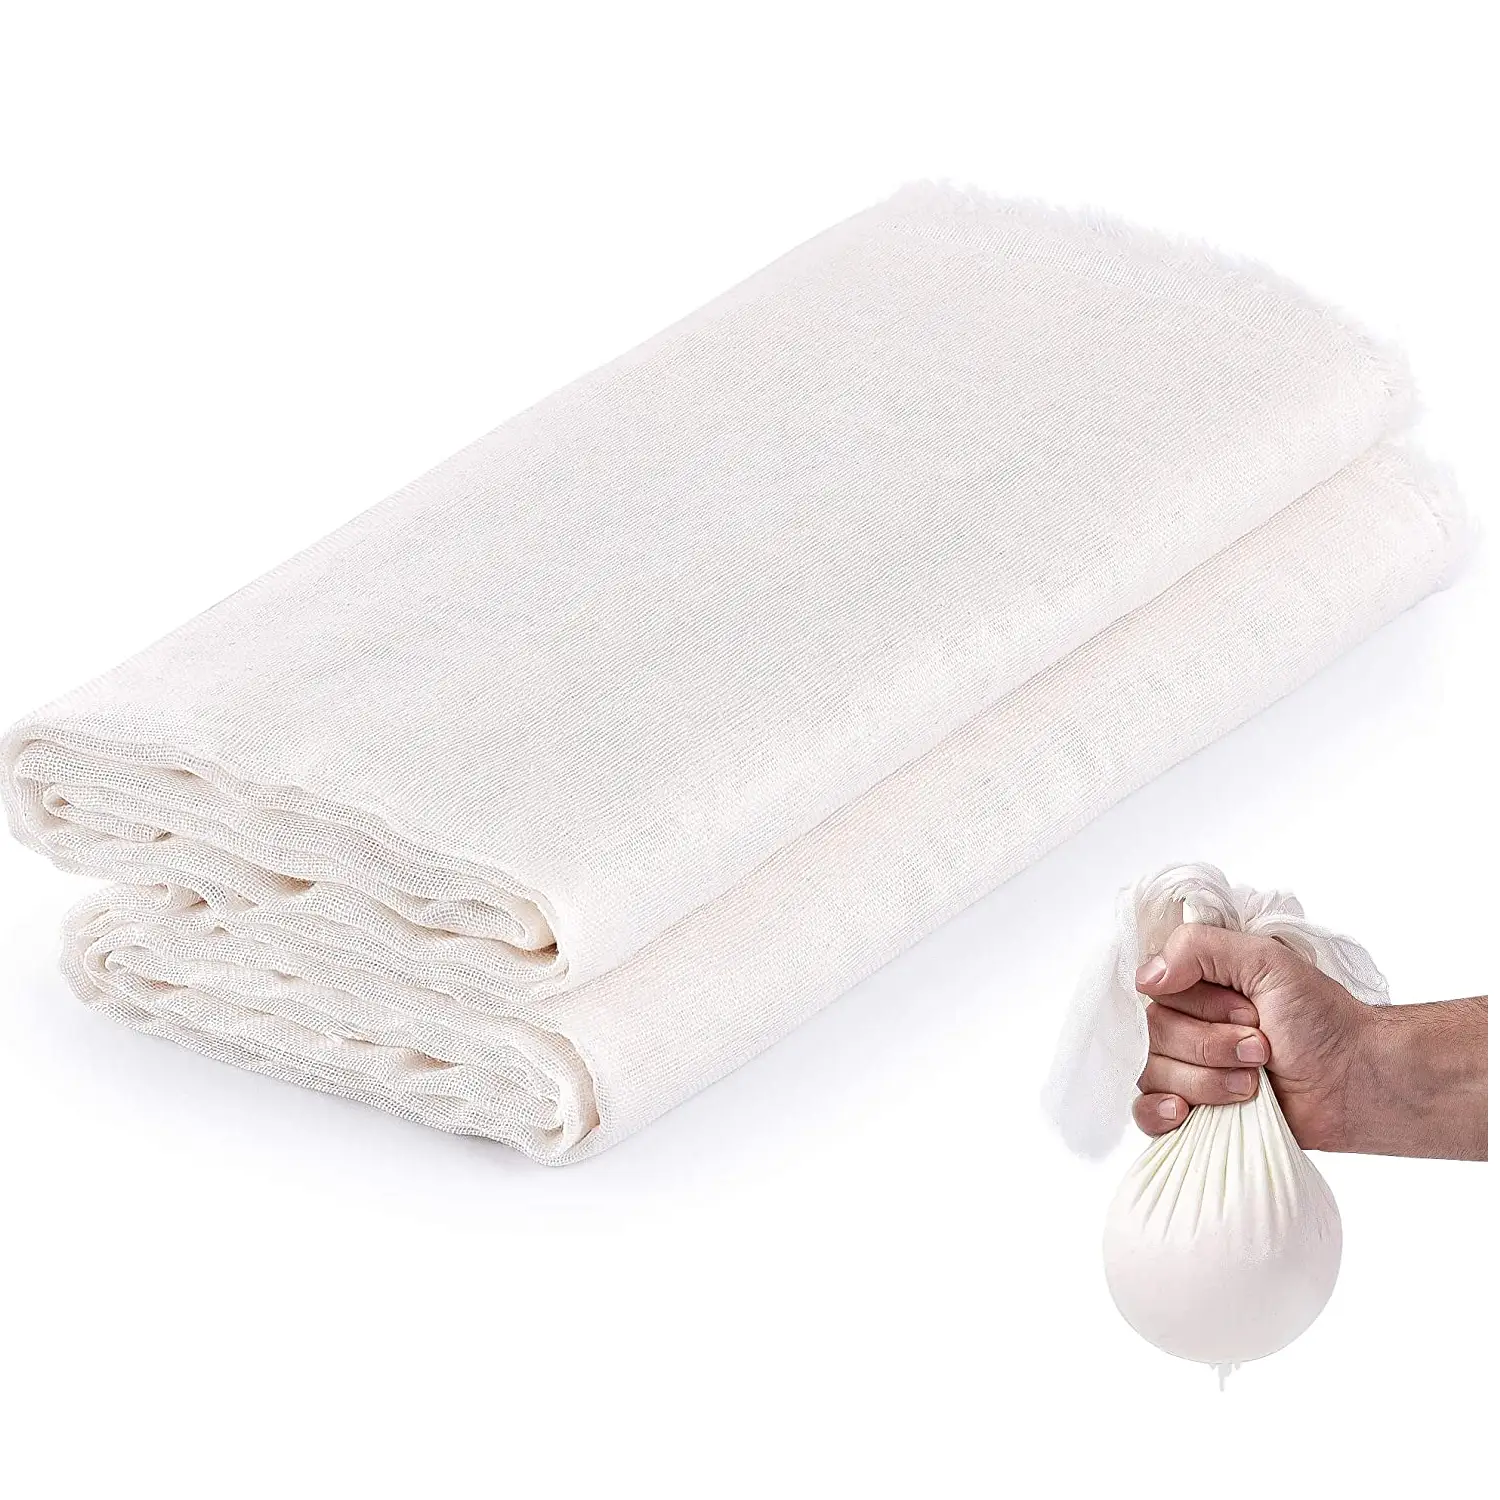 ZK Cheesecloth - Cotton Grade 90 Unbleached